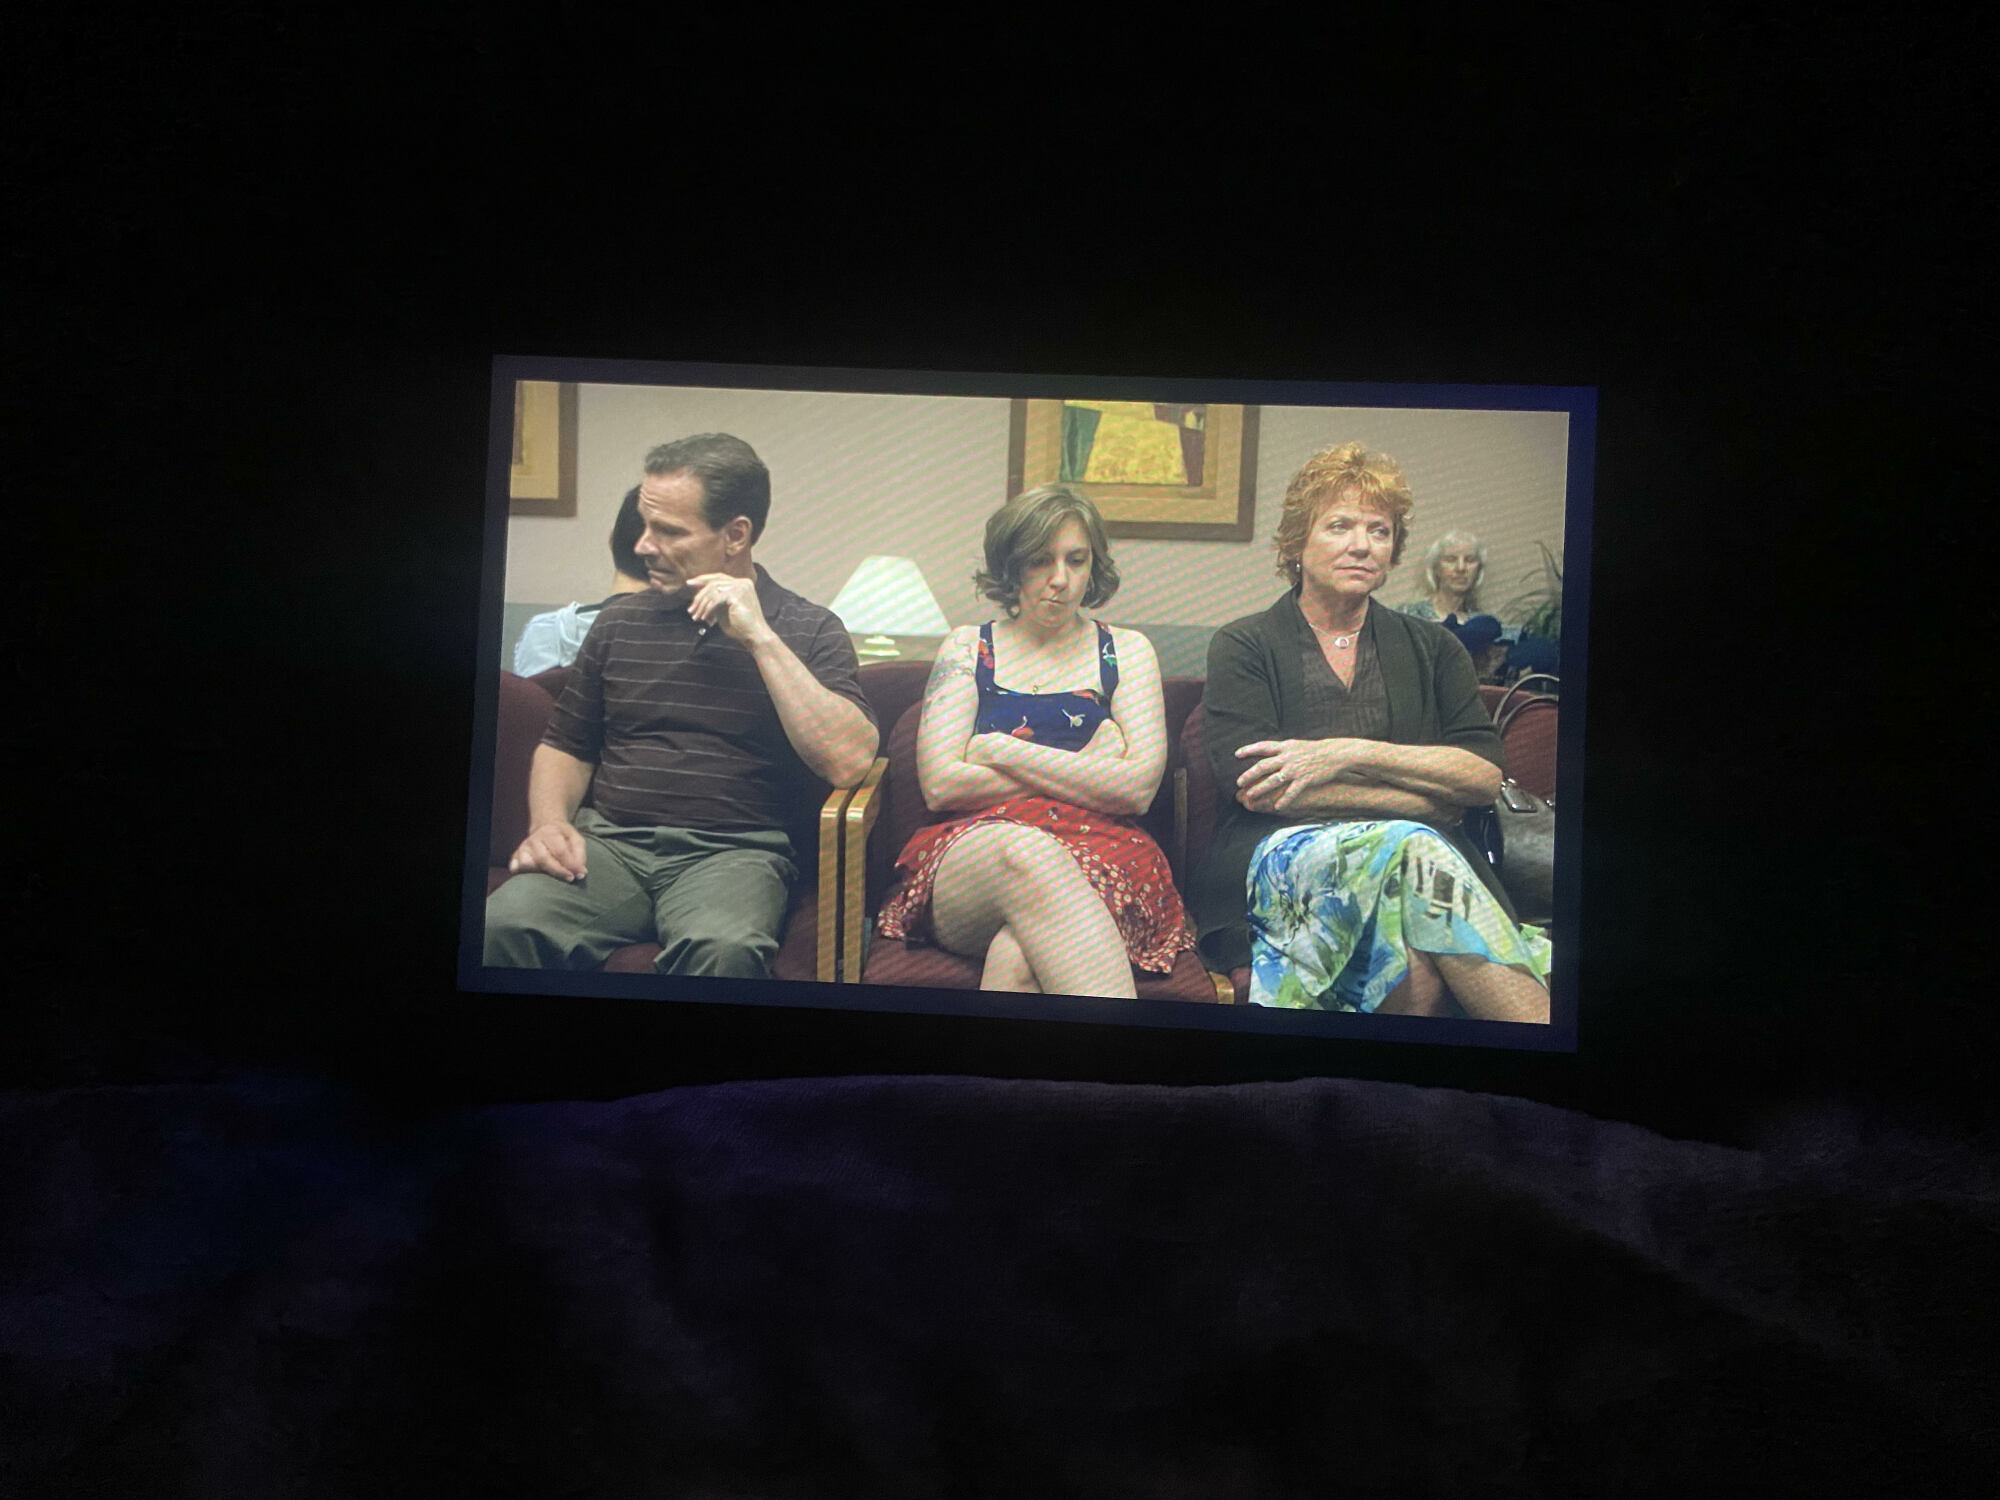 a close-up of an amazon fire 7 tablet playing an episode of "girls" on a bed in a dark room